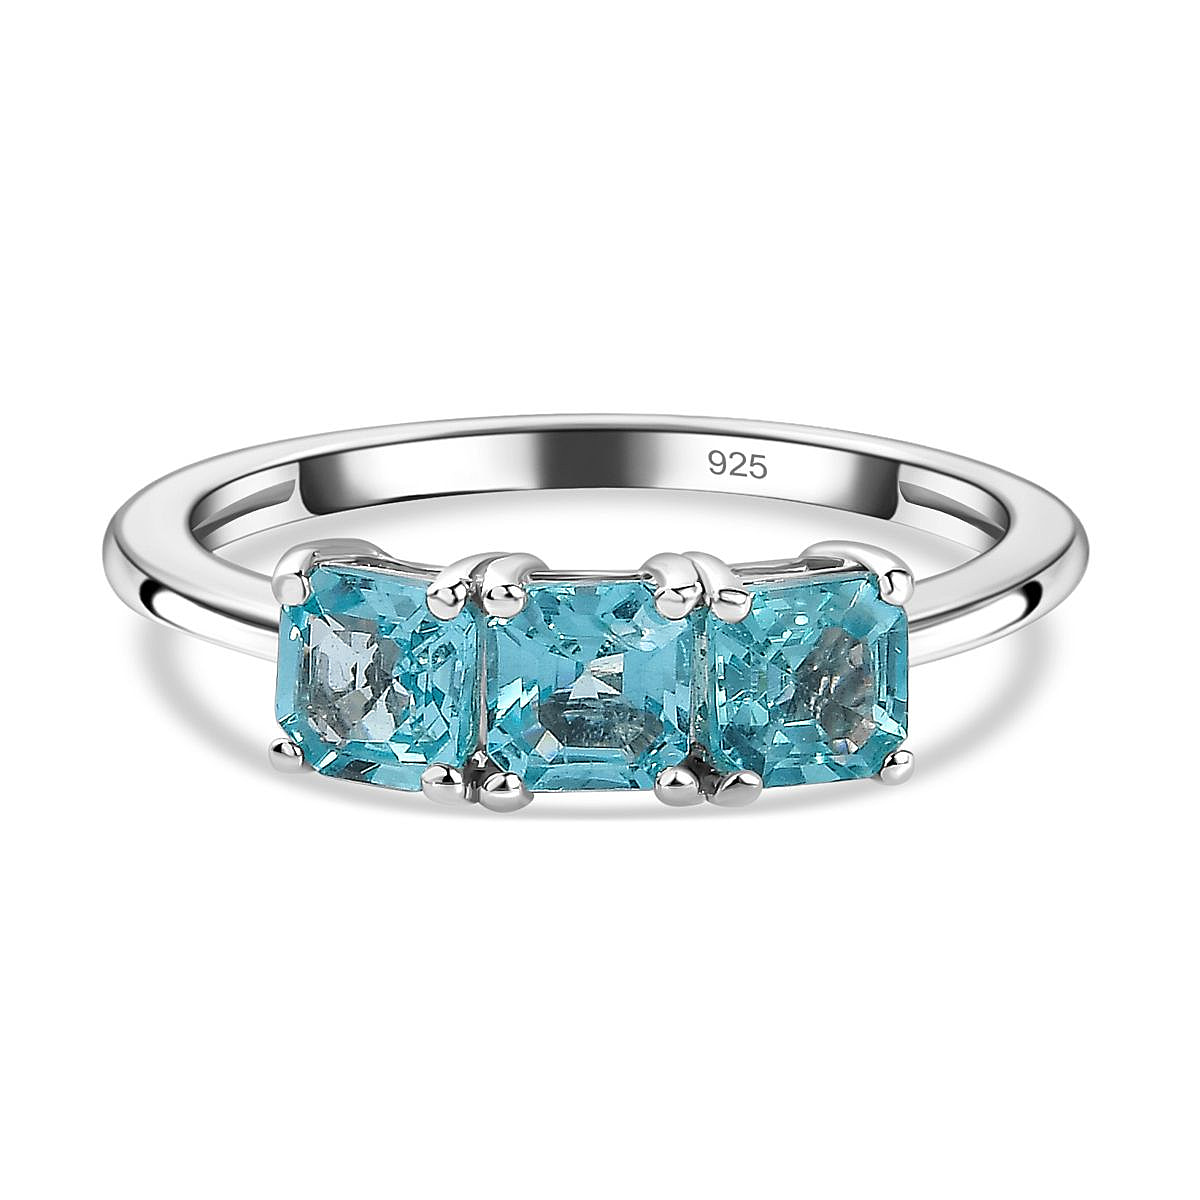 Blue Apatite 3 Stone Ring in Platinum Overlay Sterling Silver 1.10 Ct.